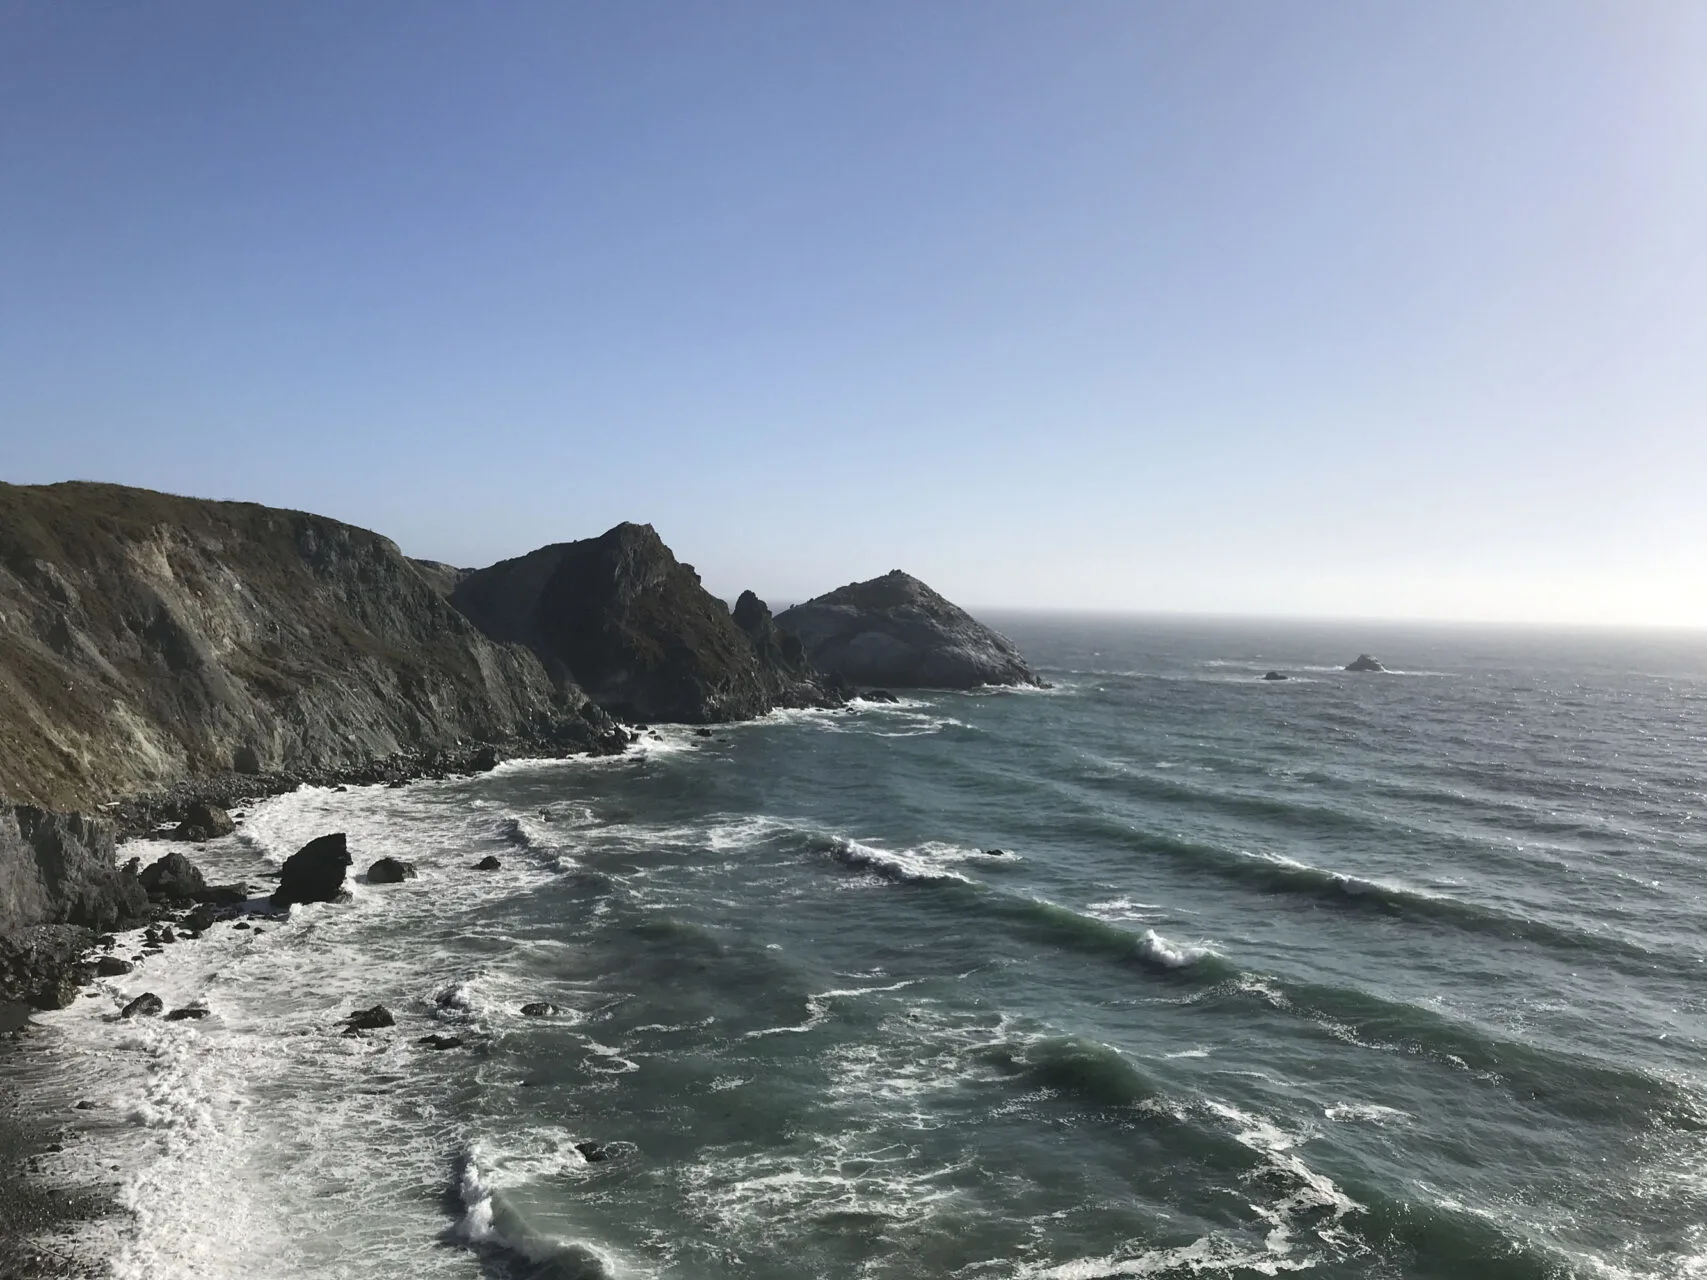 Big Sur has one of the best viewpoints on the Pacific Coast Highway.